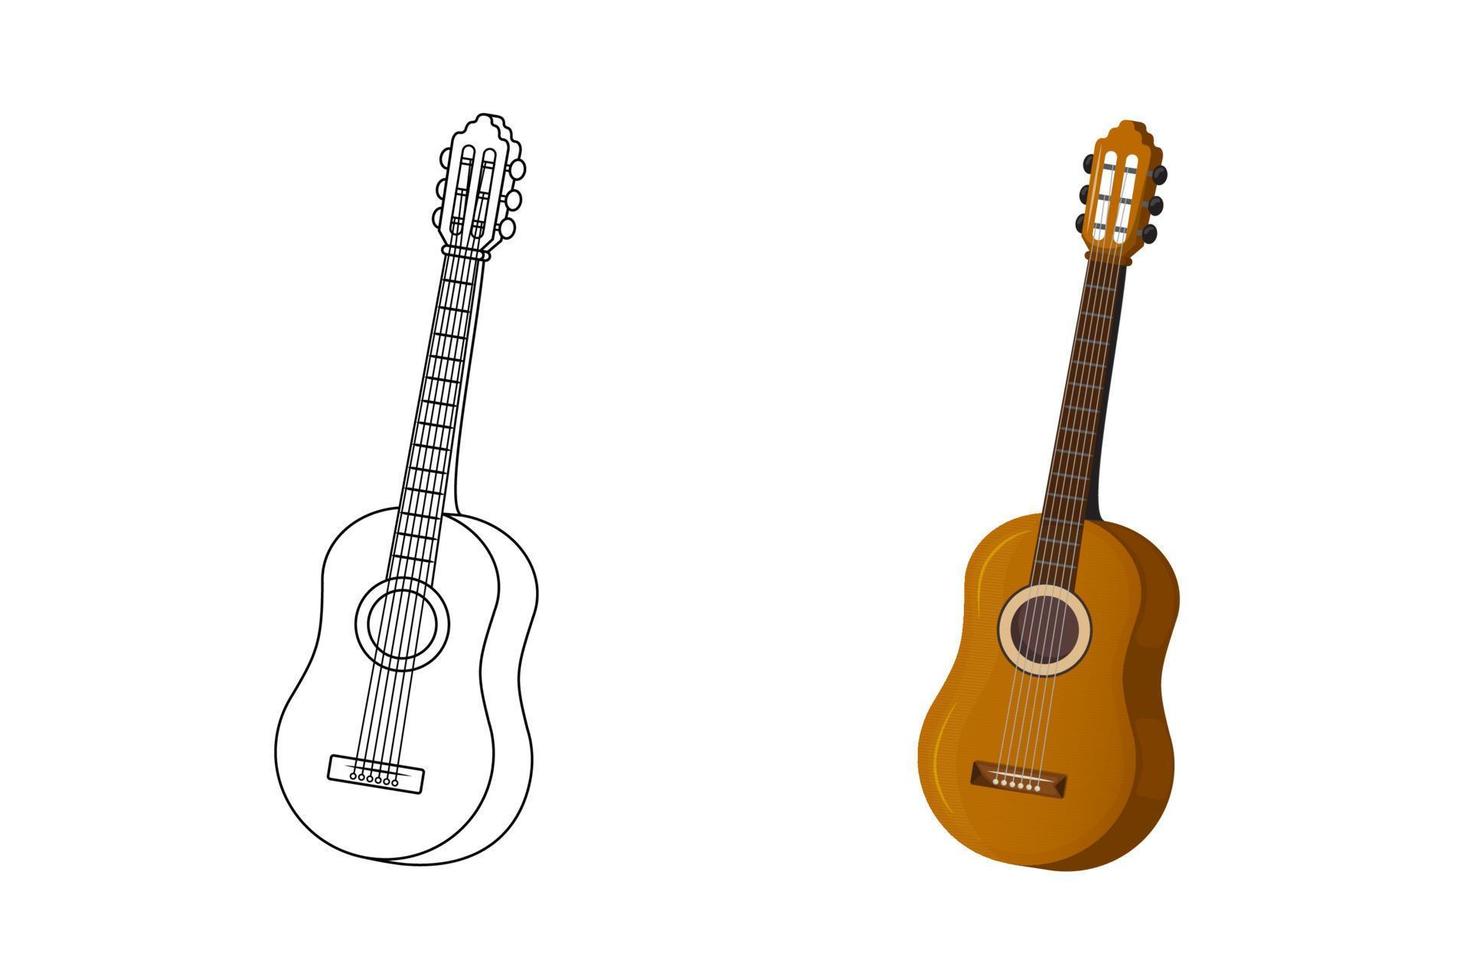 Coloring page for children - a classic musical instrument - guitar. Black and white illustration. Children's coloring book for elementary school. Vector. vector